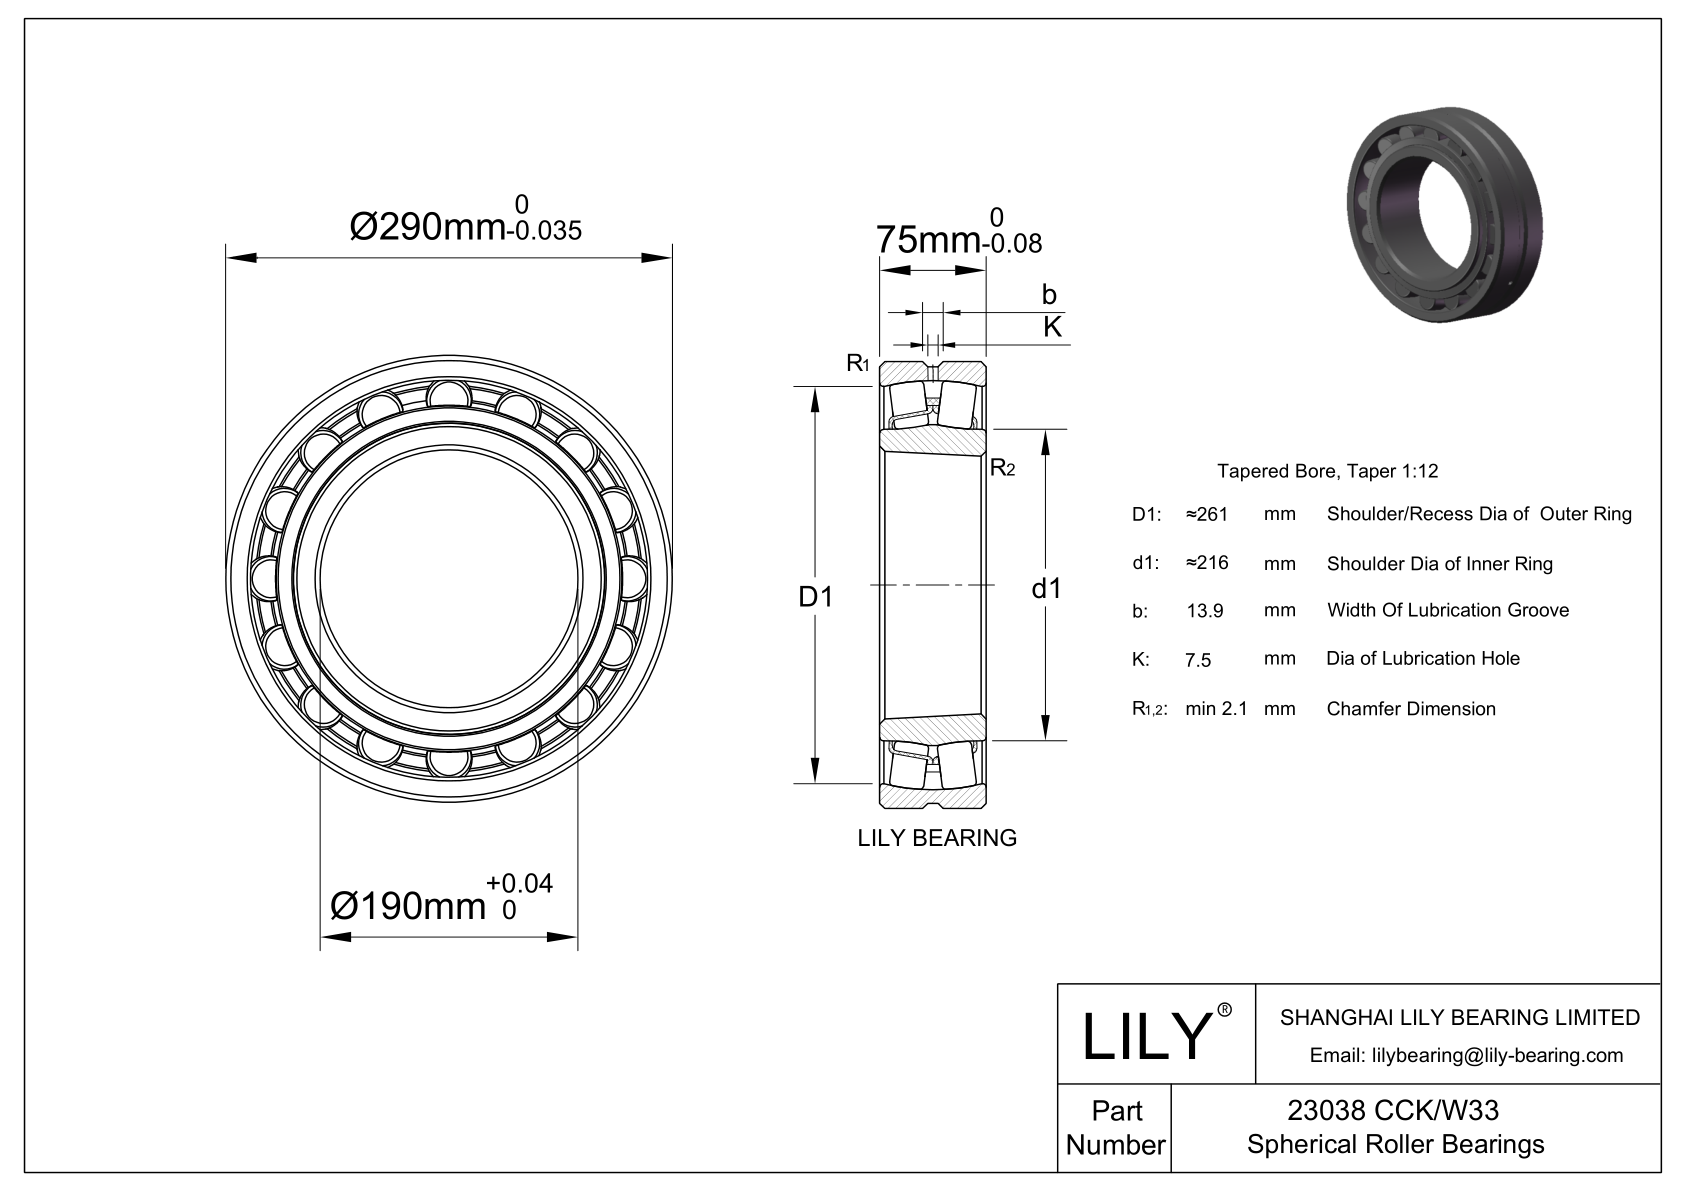 23038 CCK/W33 Double Row Spherical Roller Bearing cad drawing